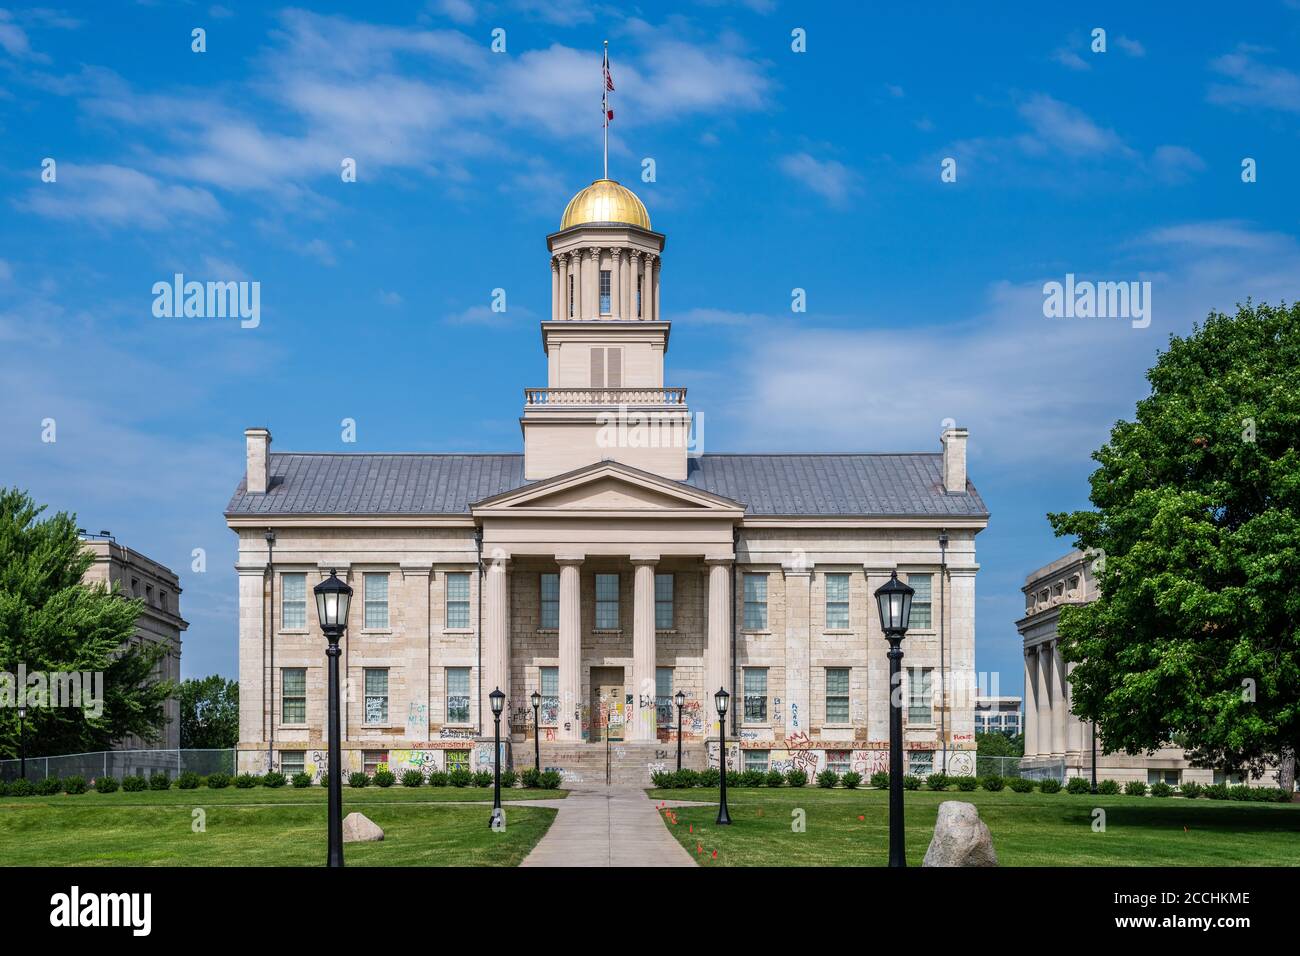 Iowa Old Capitol Building covered in Black Lives Matter graffiti Stock Photo